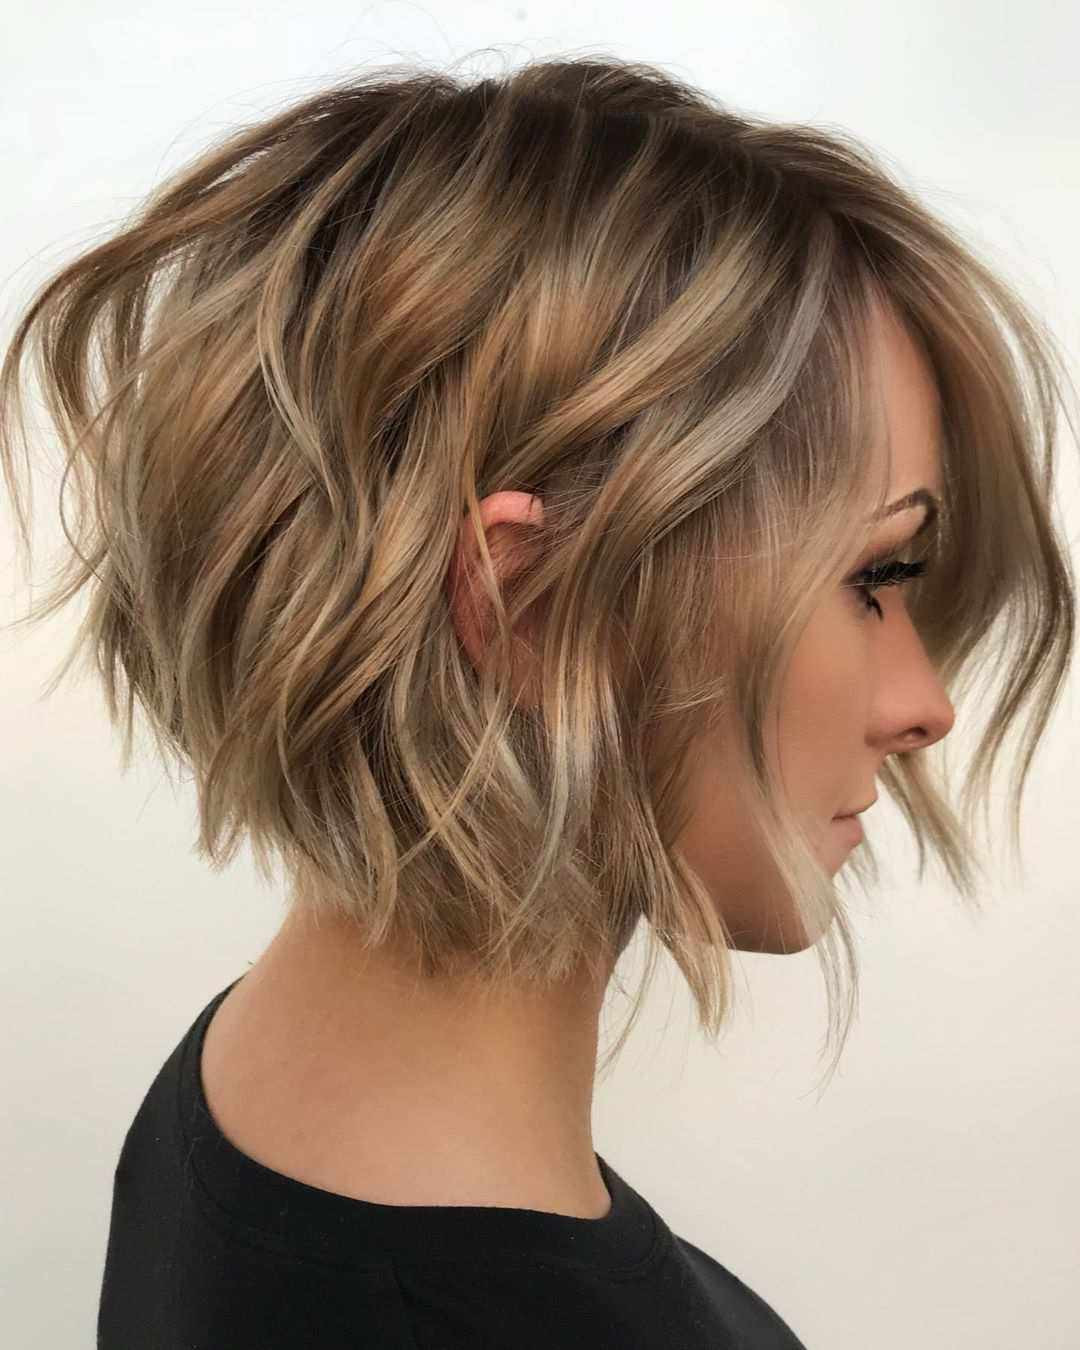 Cute Fall Hairstyles 2020
 The Most Popular Short Hairstyles Hairstyle Samples